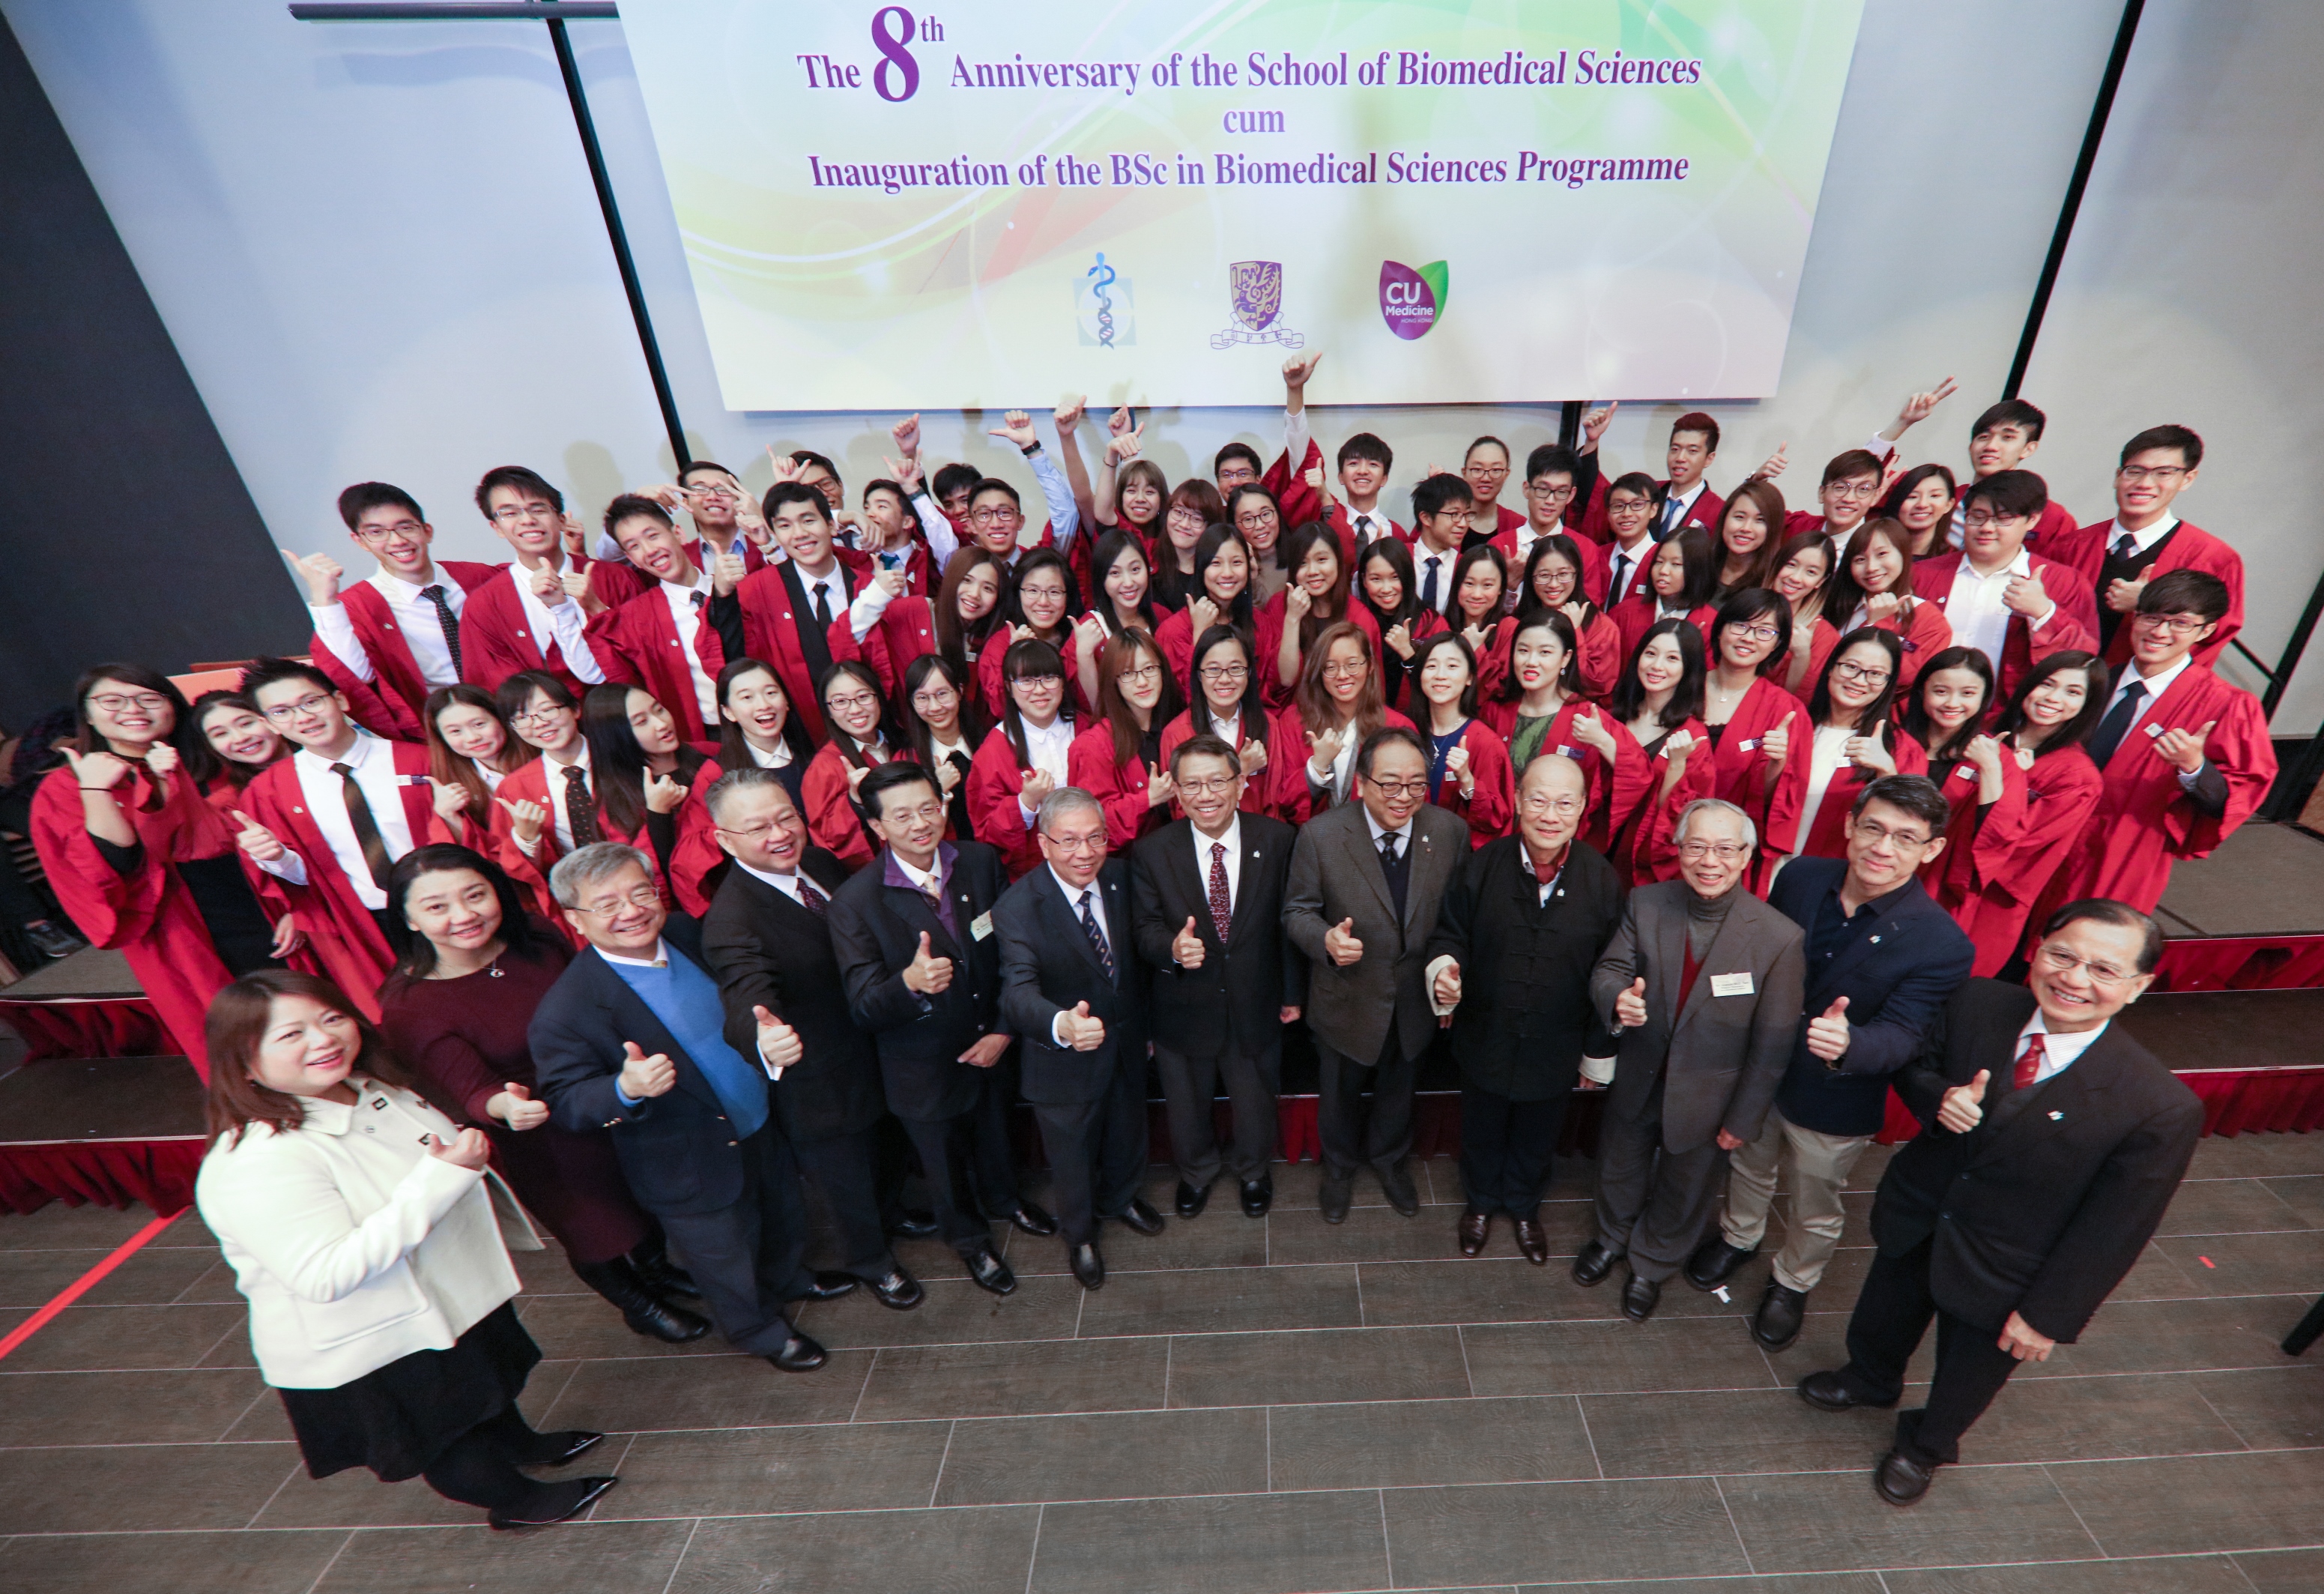  The School of Biomedical Sciences at CUHK celebrates its 8th anniversary. Over a hundred guests, teachers, students and school members gather together to review the past and look forward to the future.